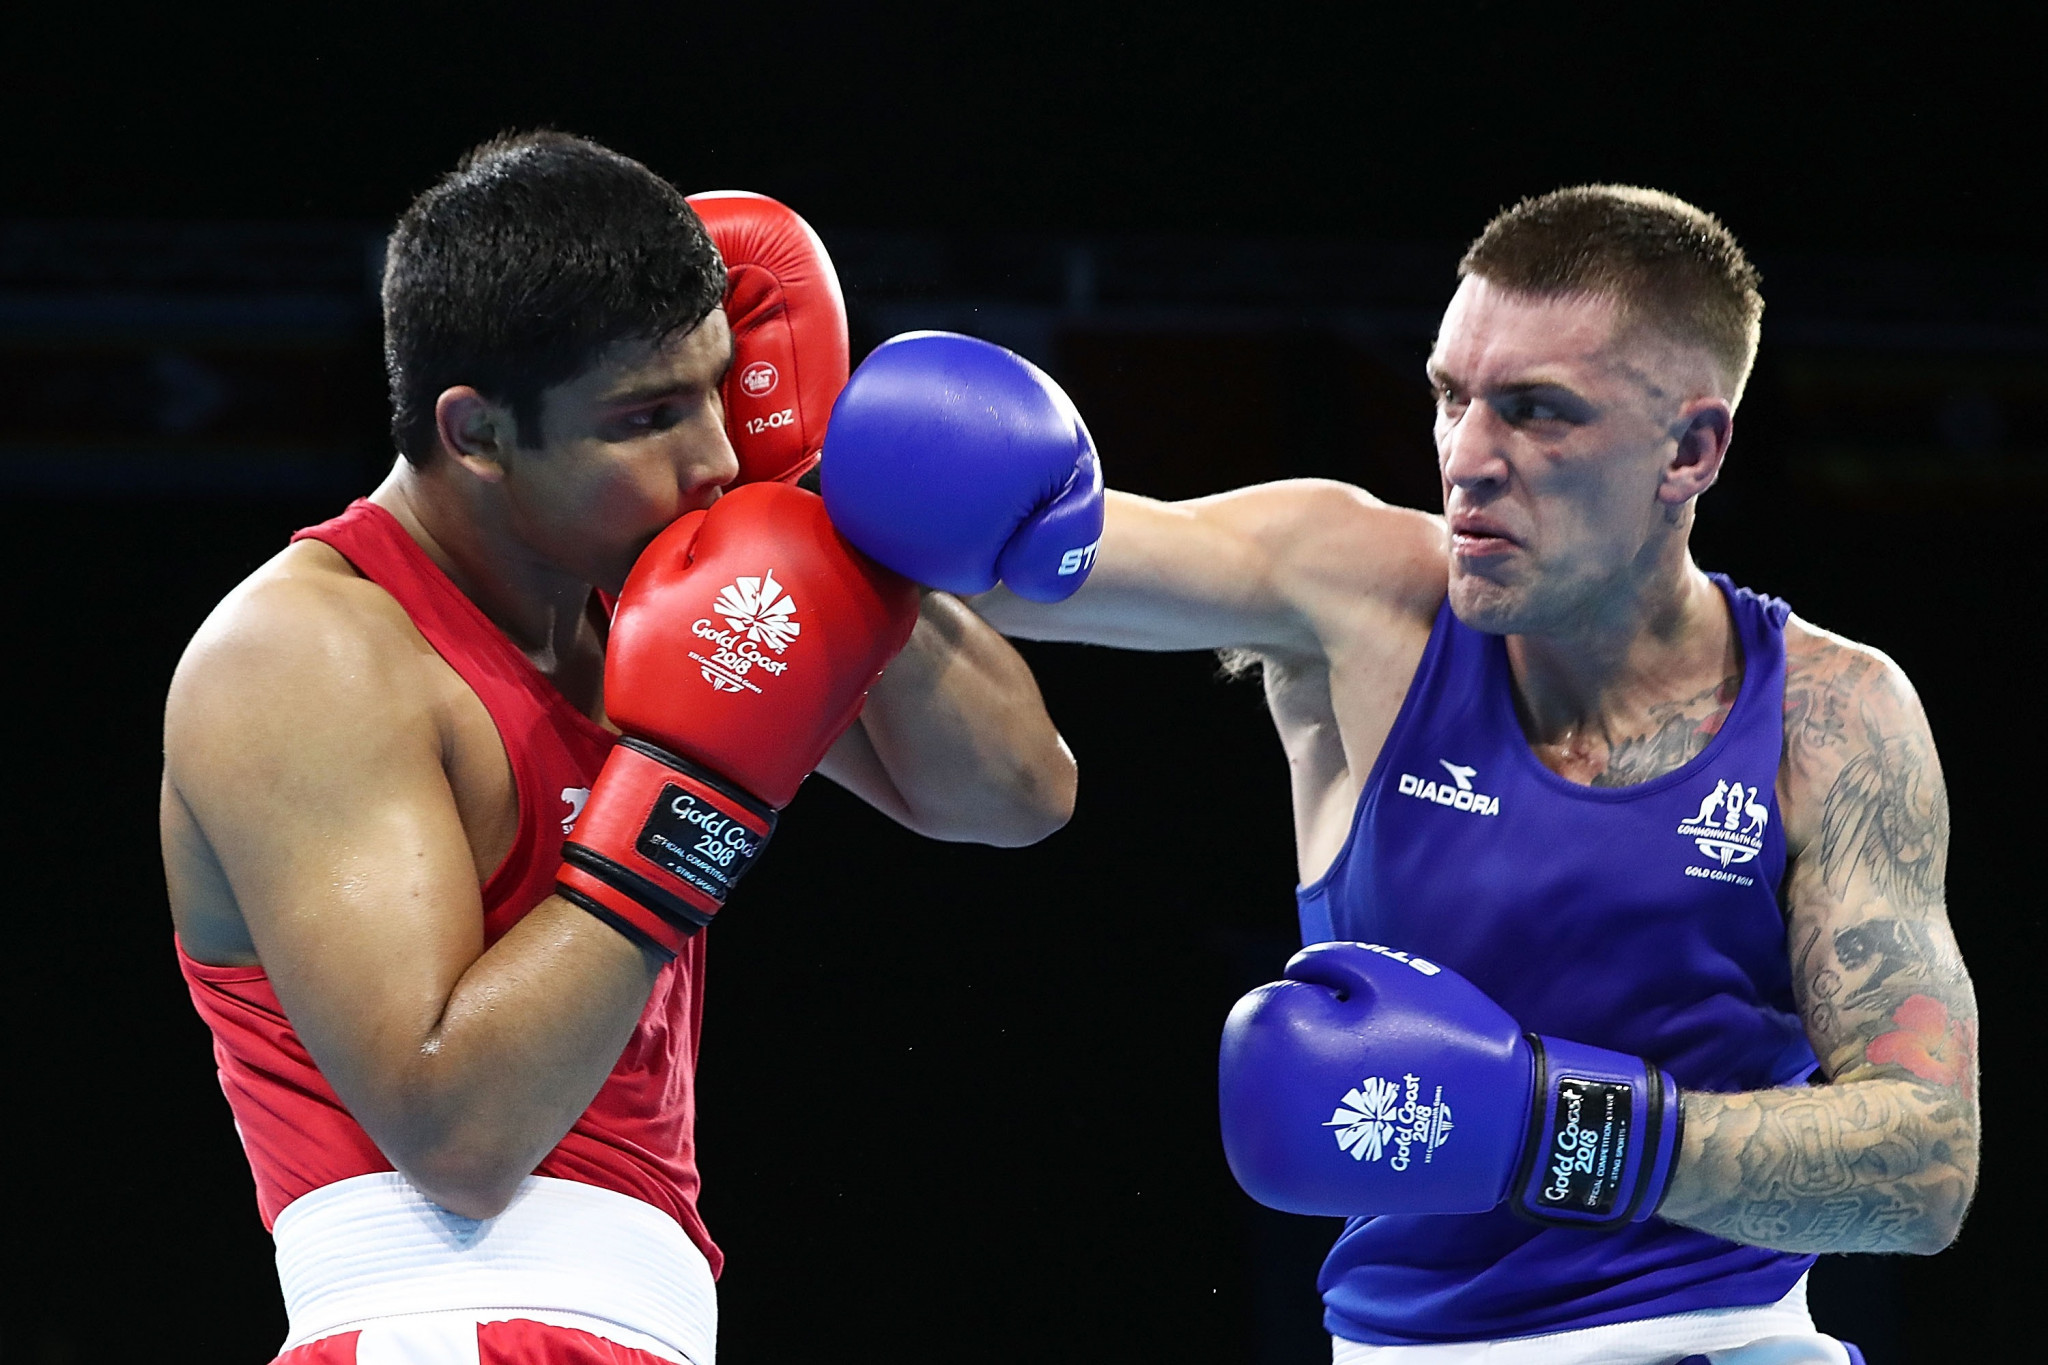 Australia's Jason Whateley was among the many fighters to reach a boxing gold medal match today, beating India's Naman Tanwar in the men's 91kg semi-finals ©Getty Images